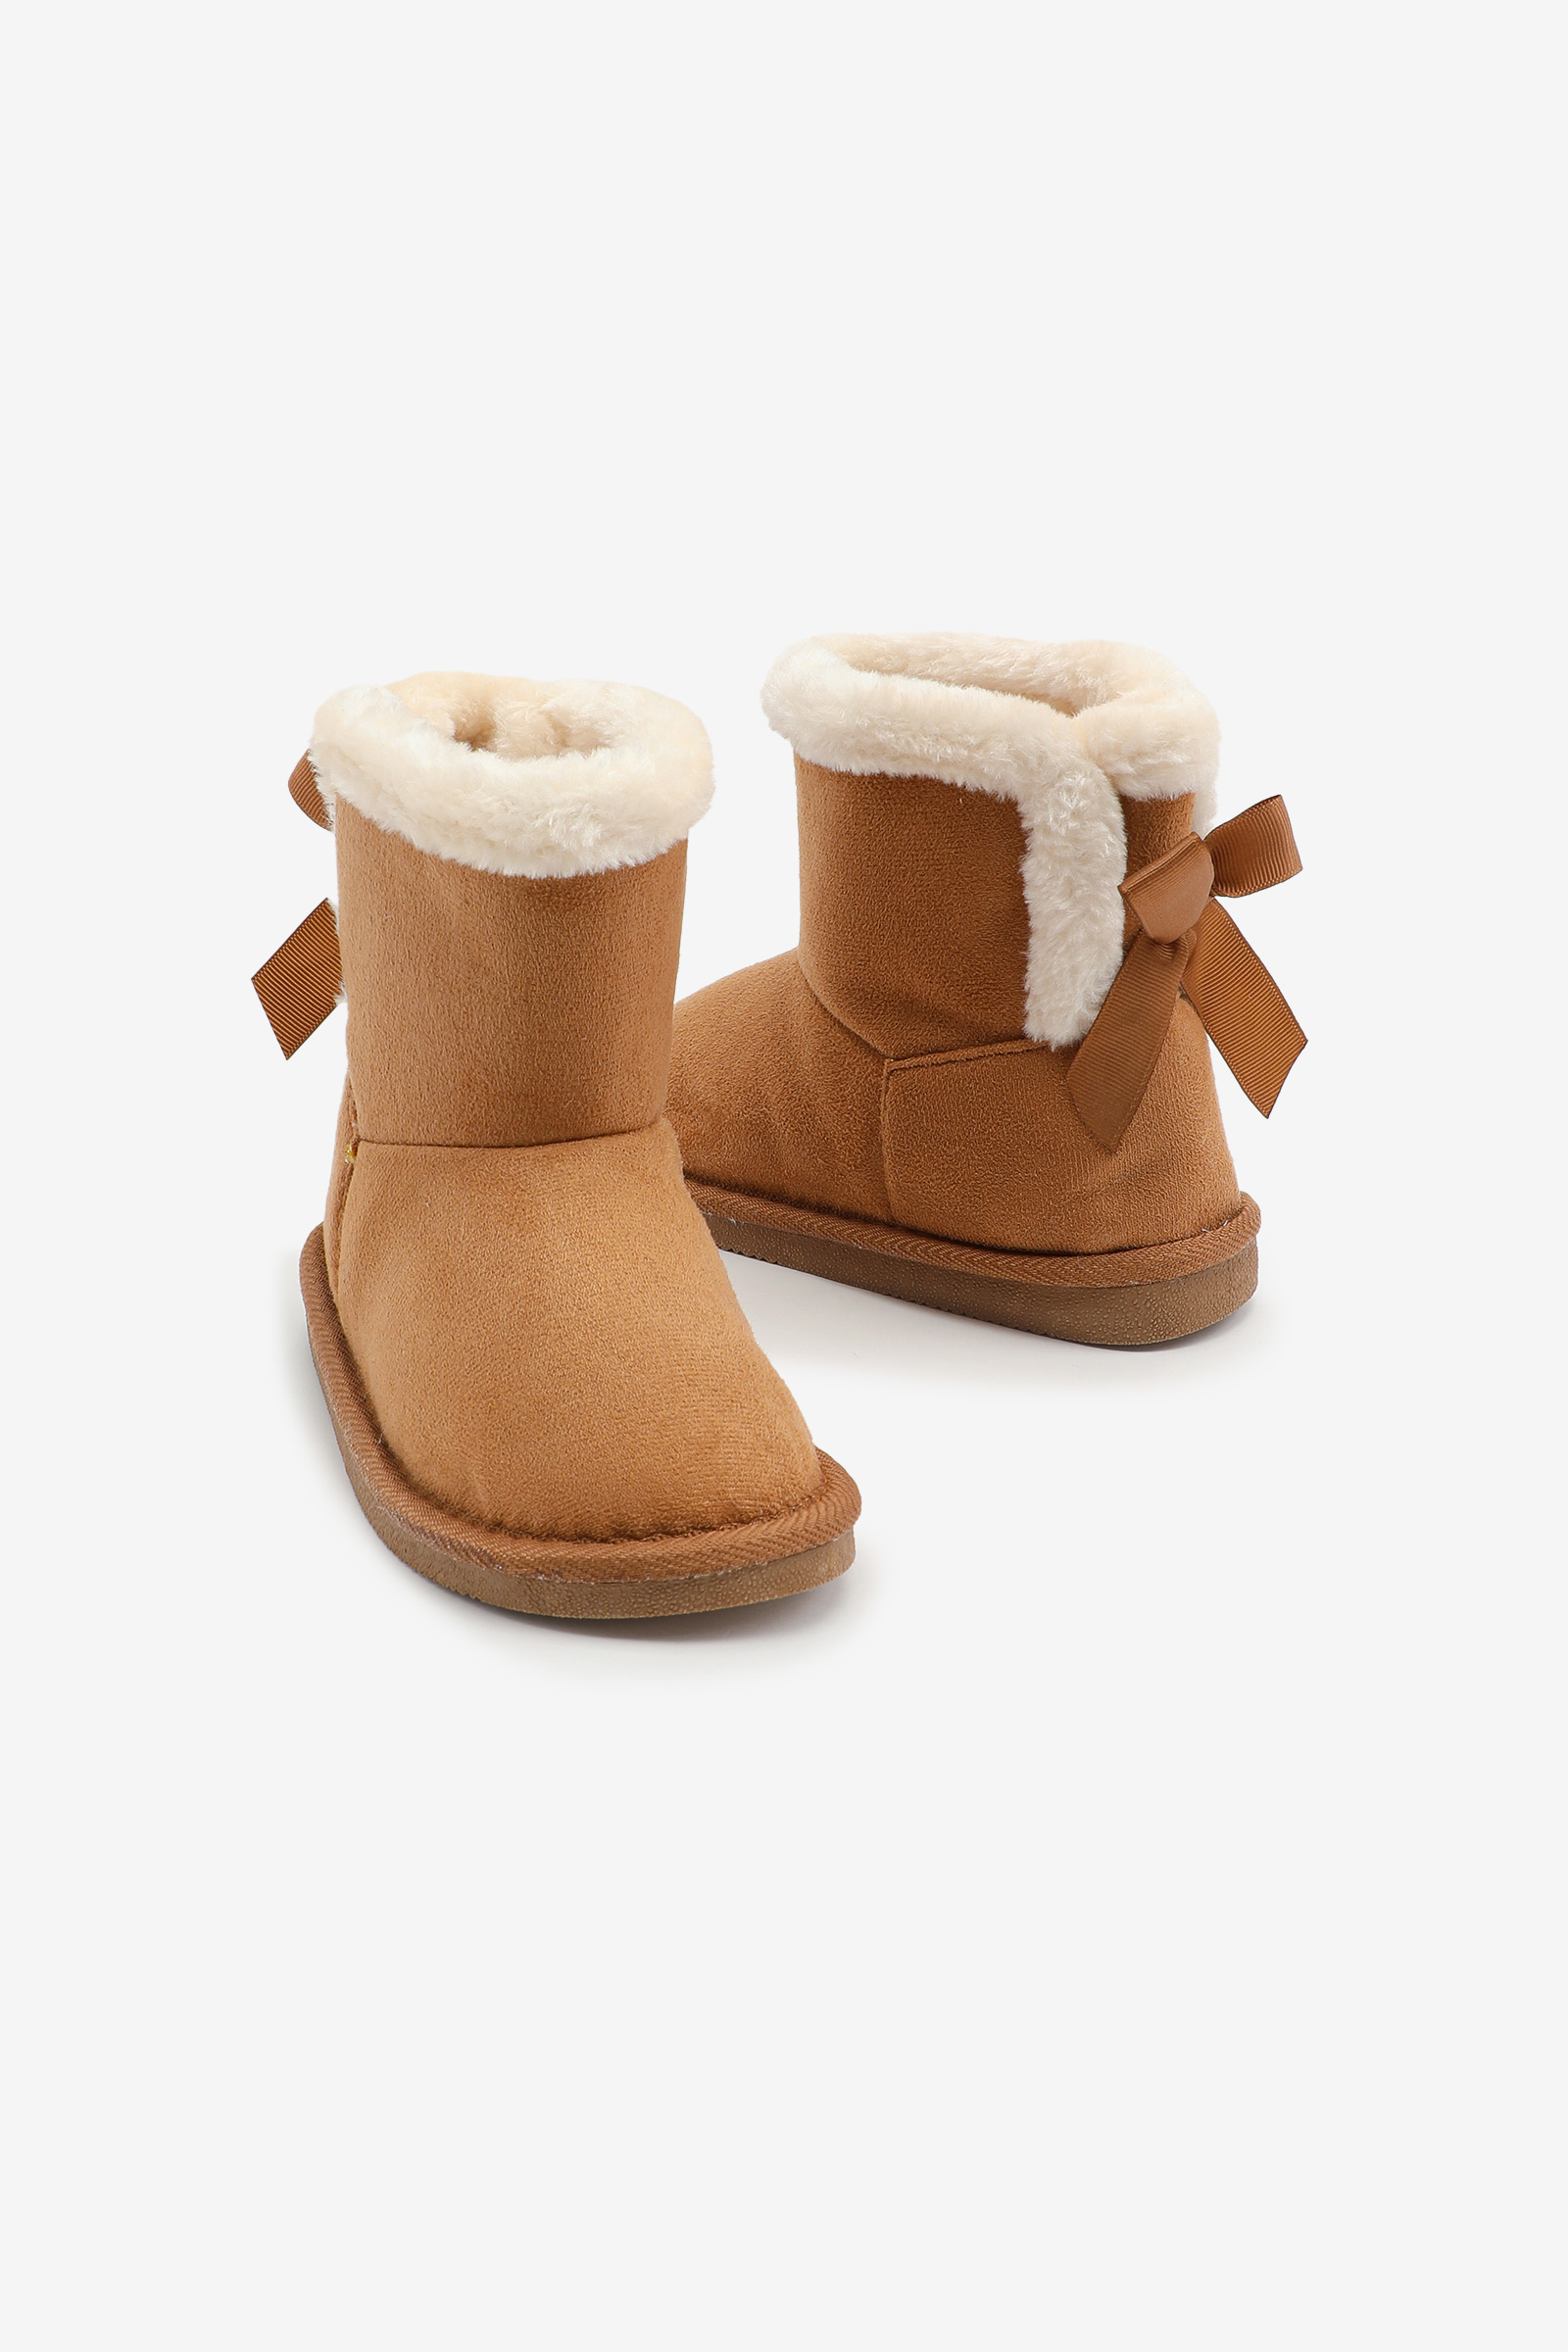 Faux Sheepskin Boots with Bow for Girls